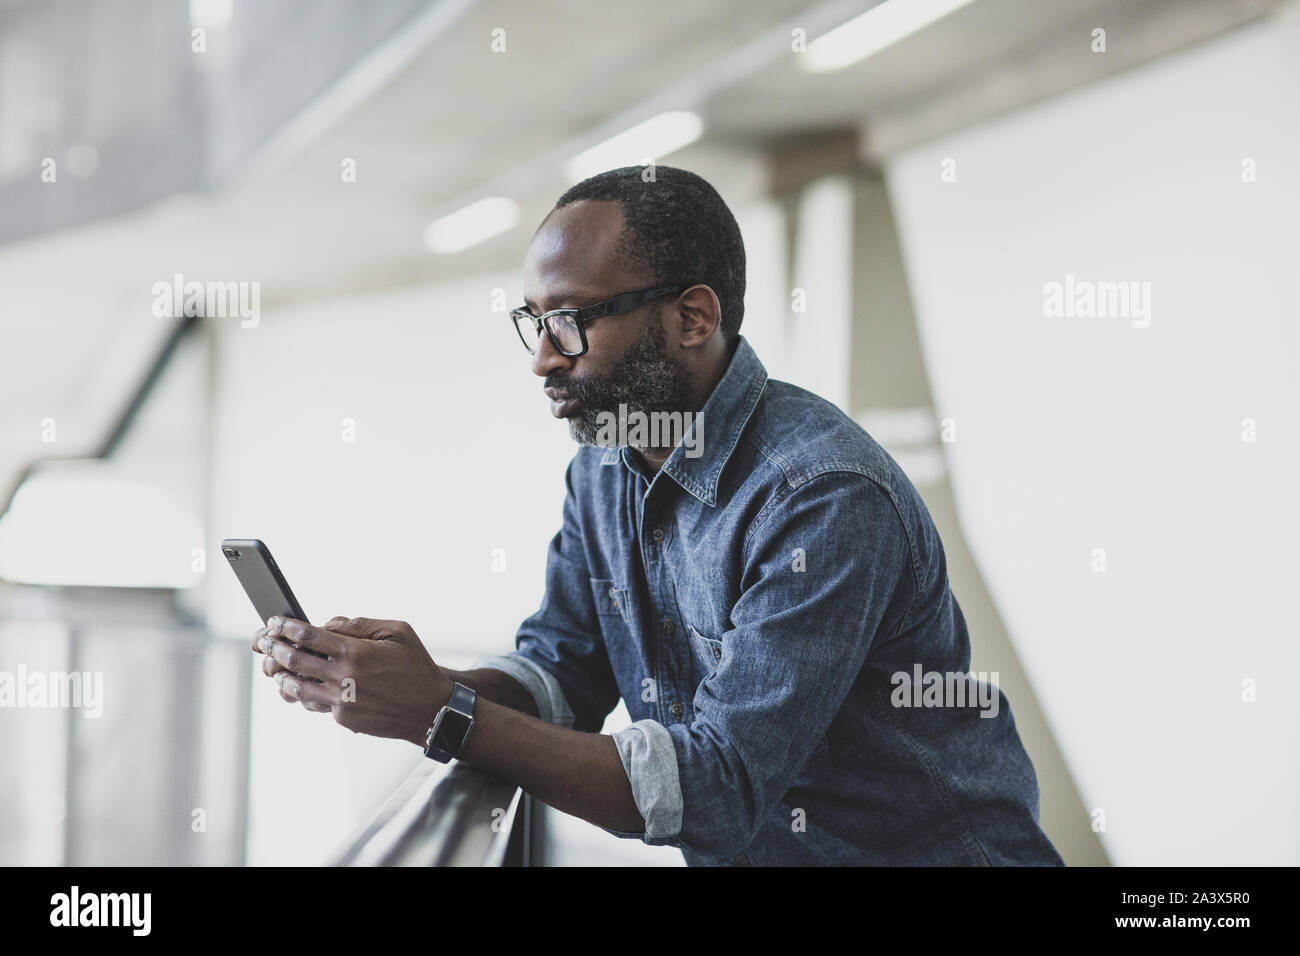 African American businessman using smartphone Banque D'Images